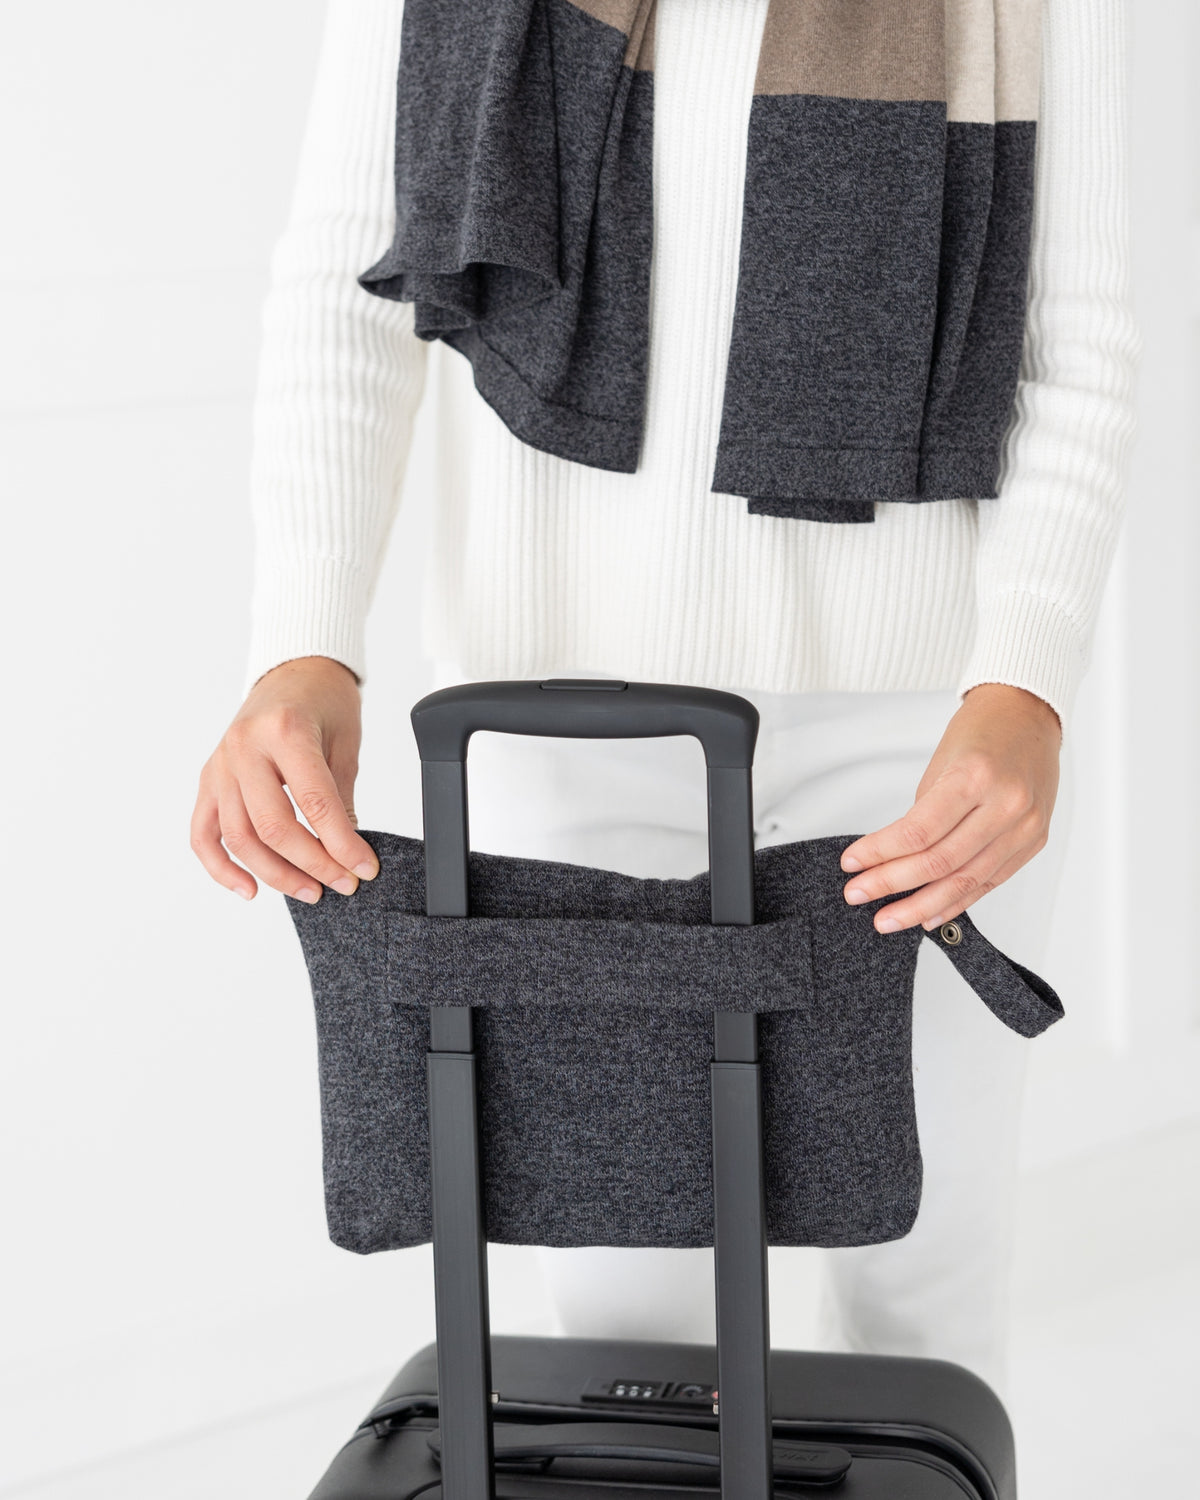 Woman placed Graphite Carry Pouch which is a gray zipper pouch that can hold the Dreamsoft Travel Scarf over handle on suitcase